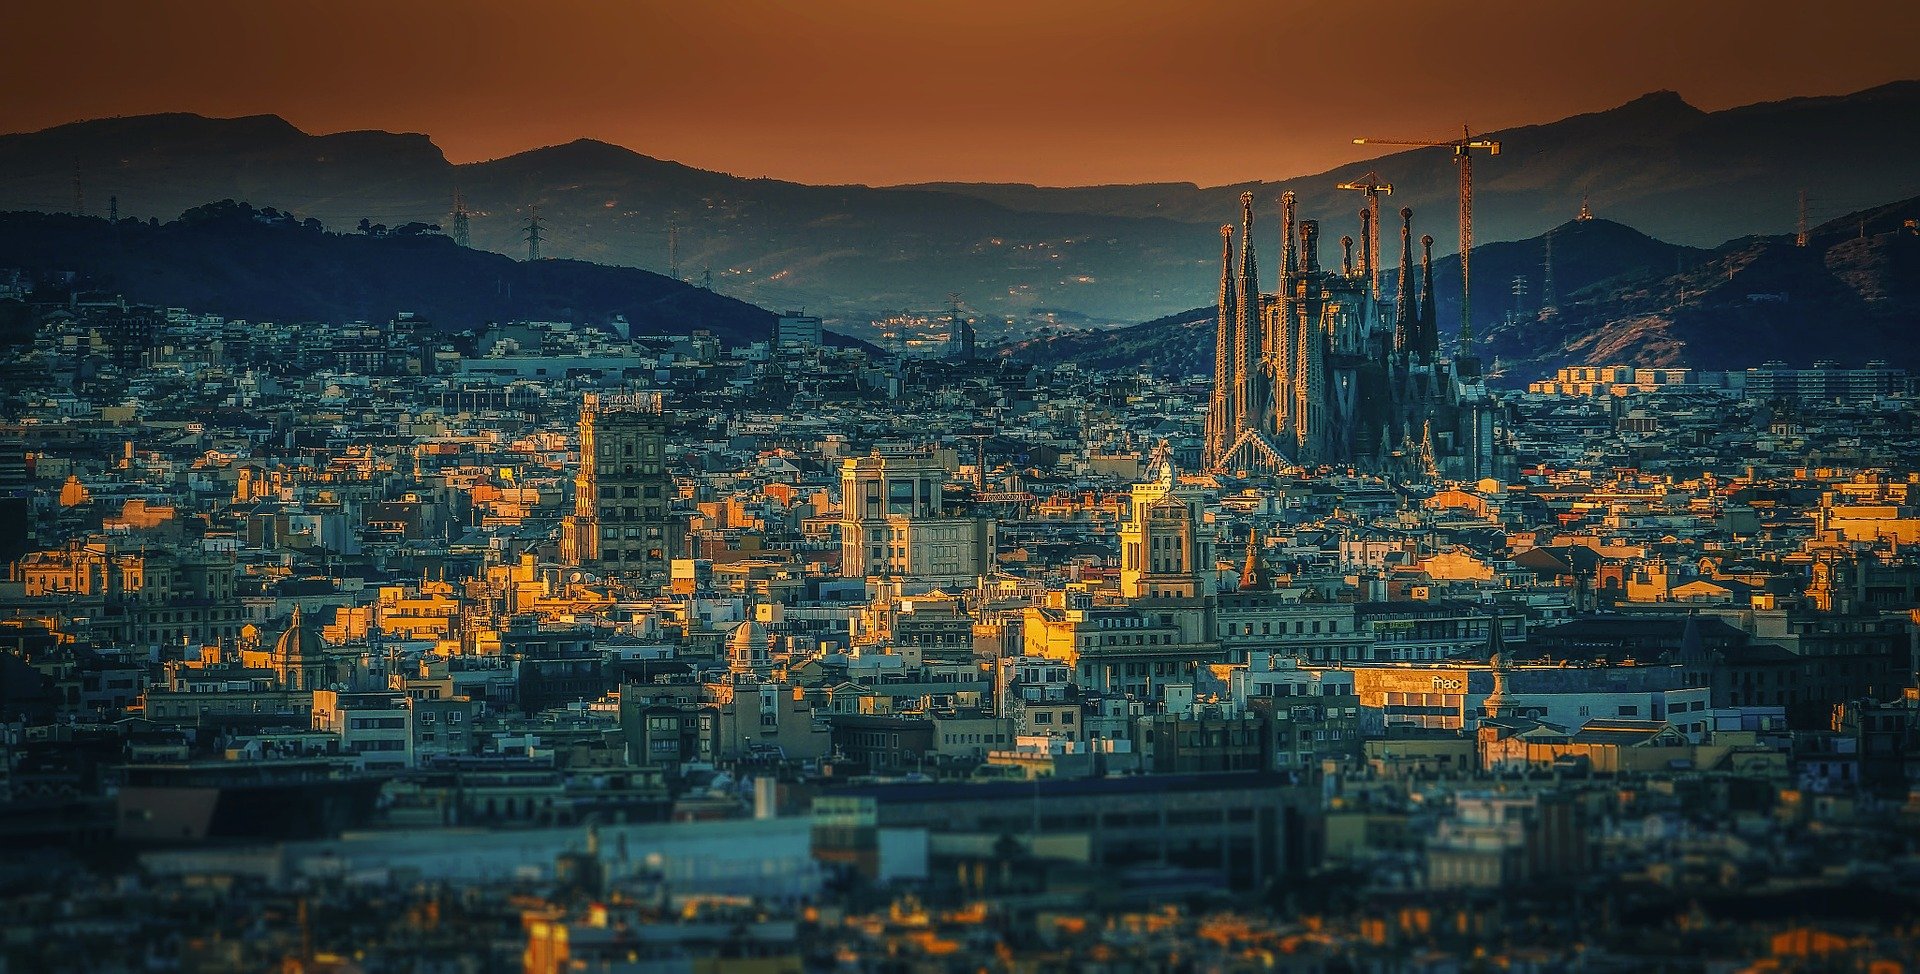 8 Curiosities Barcelona that you cannot miss